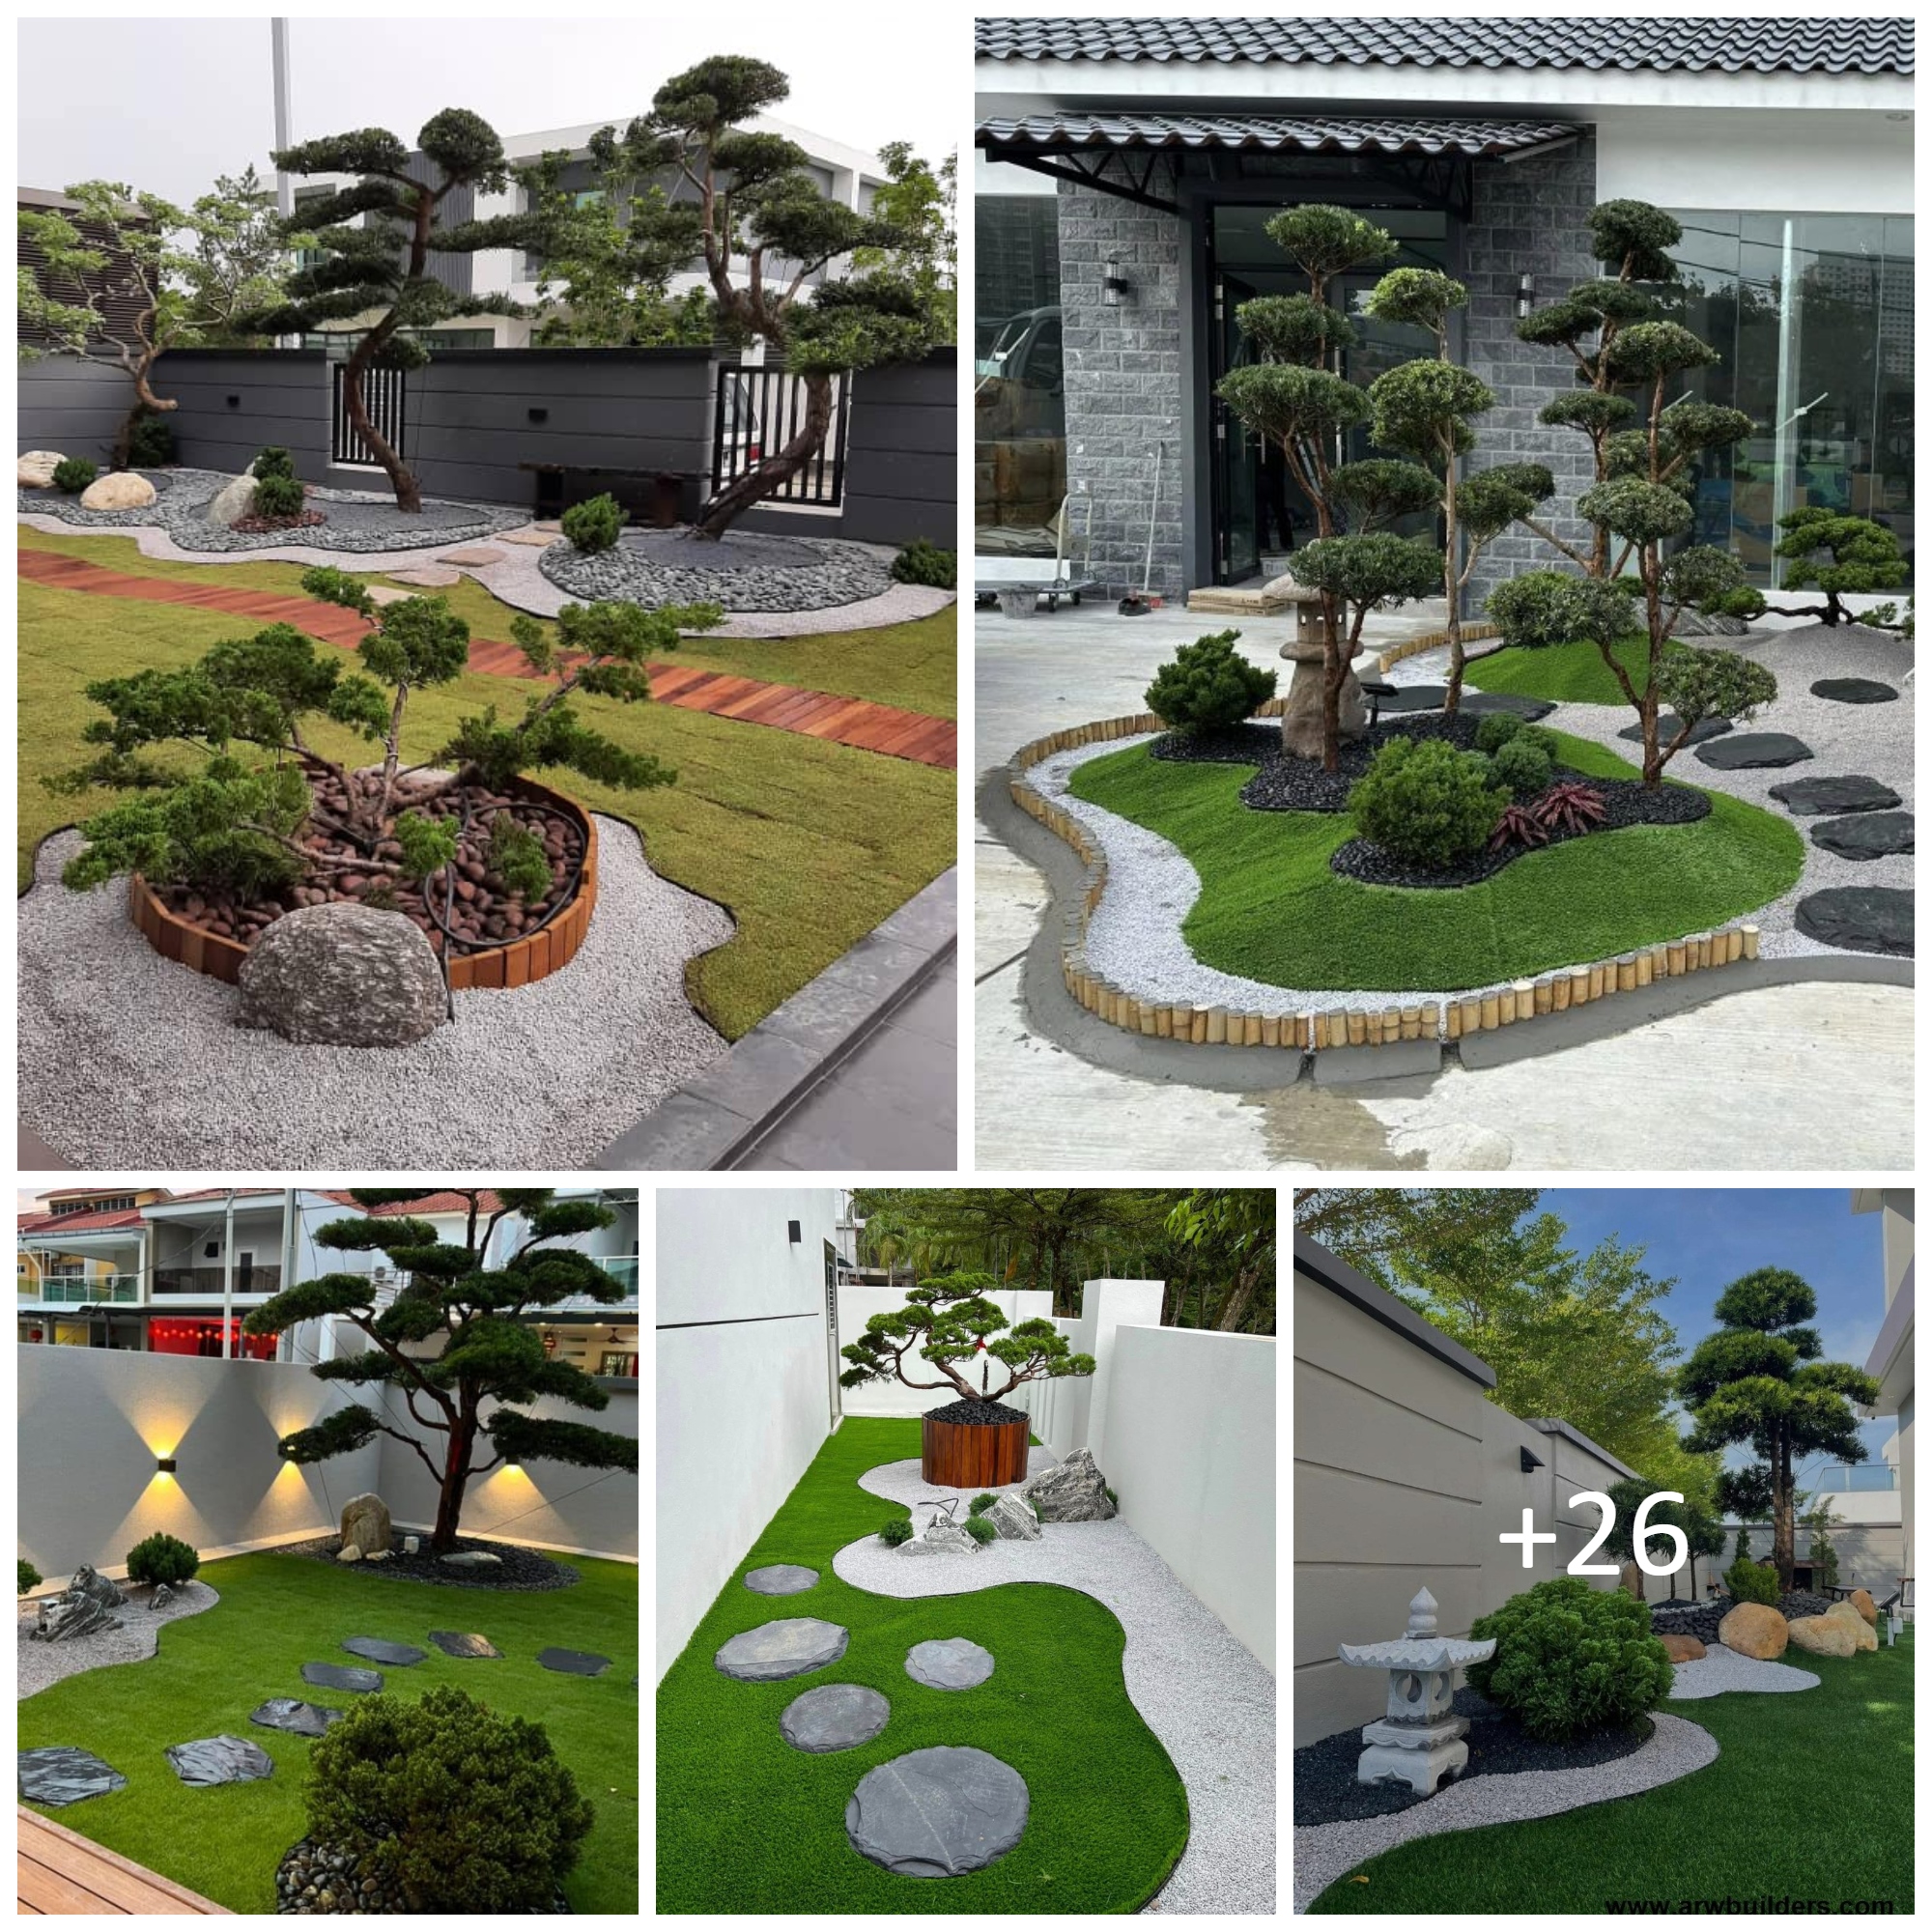 How to plant a Japanese-inspired garden